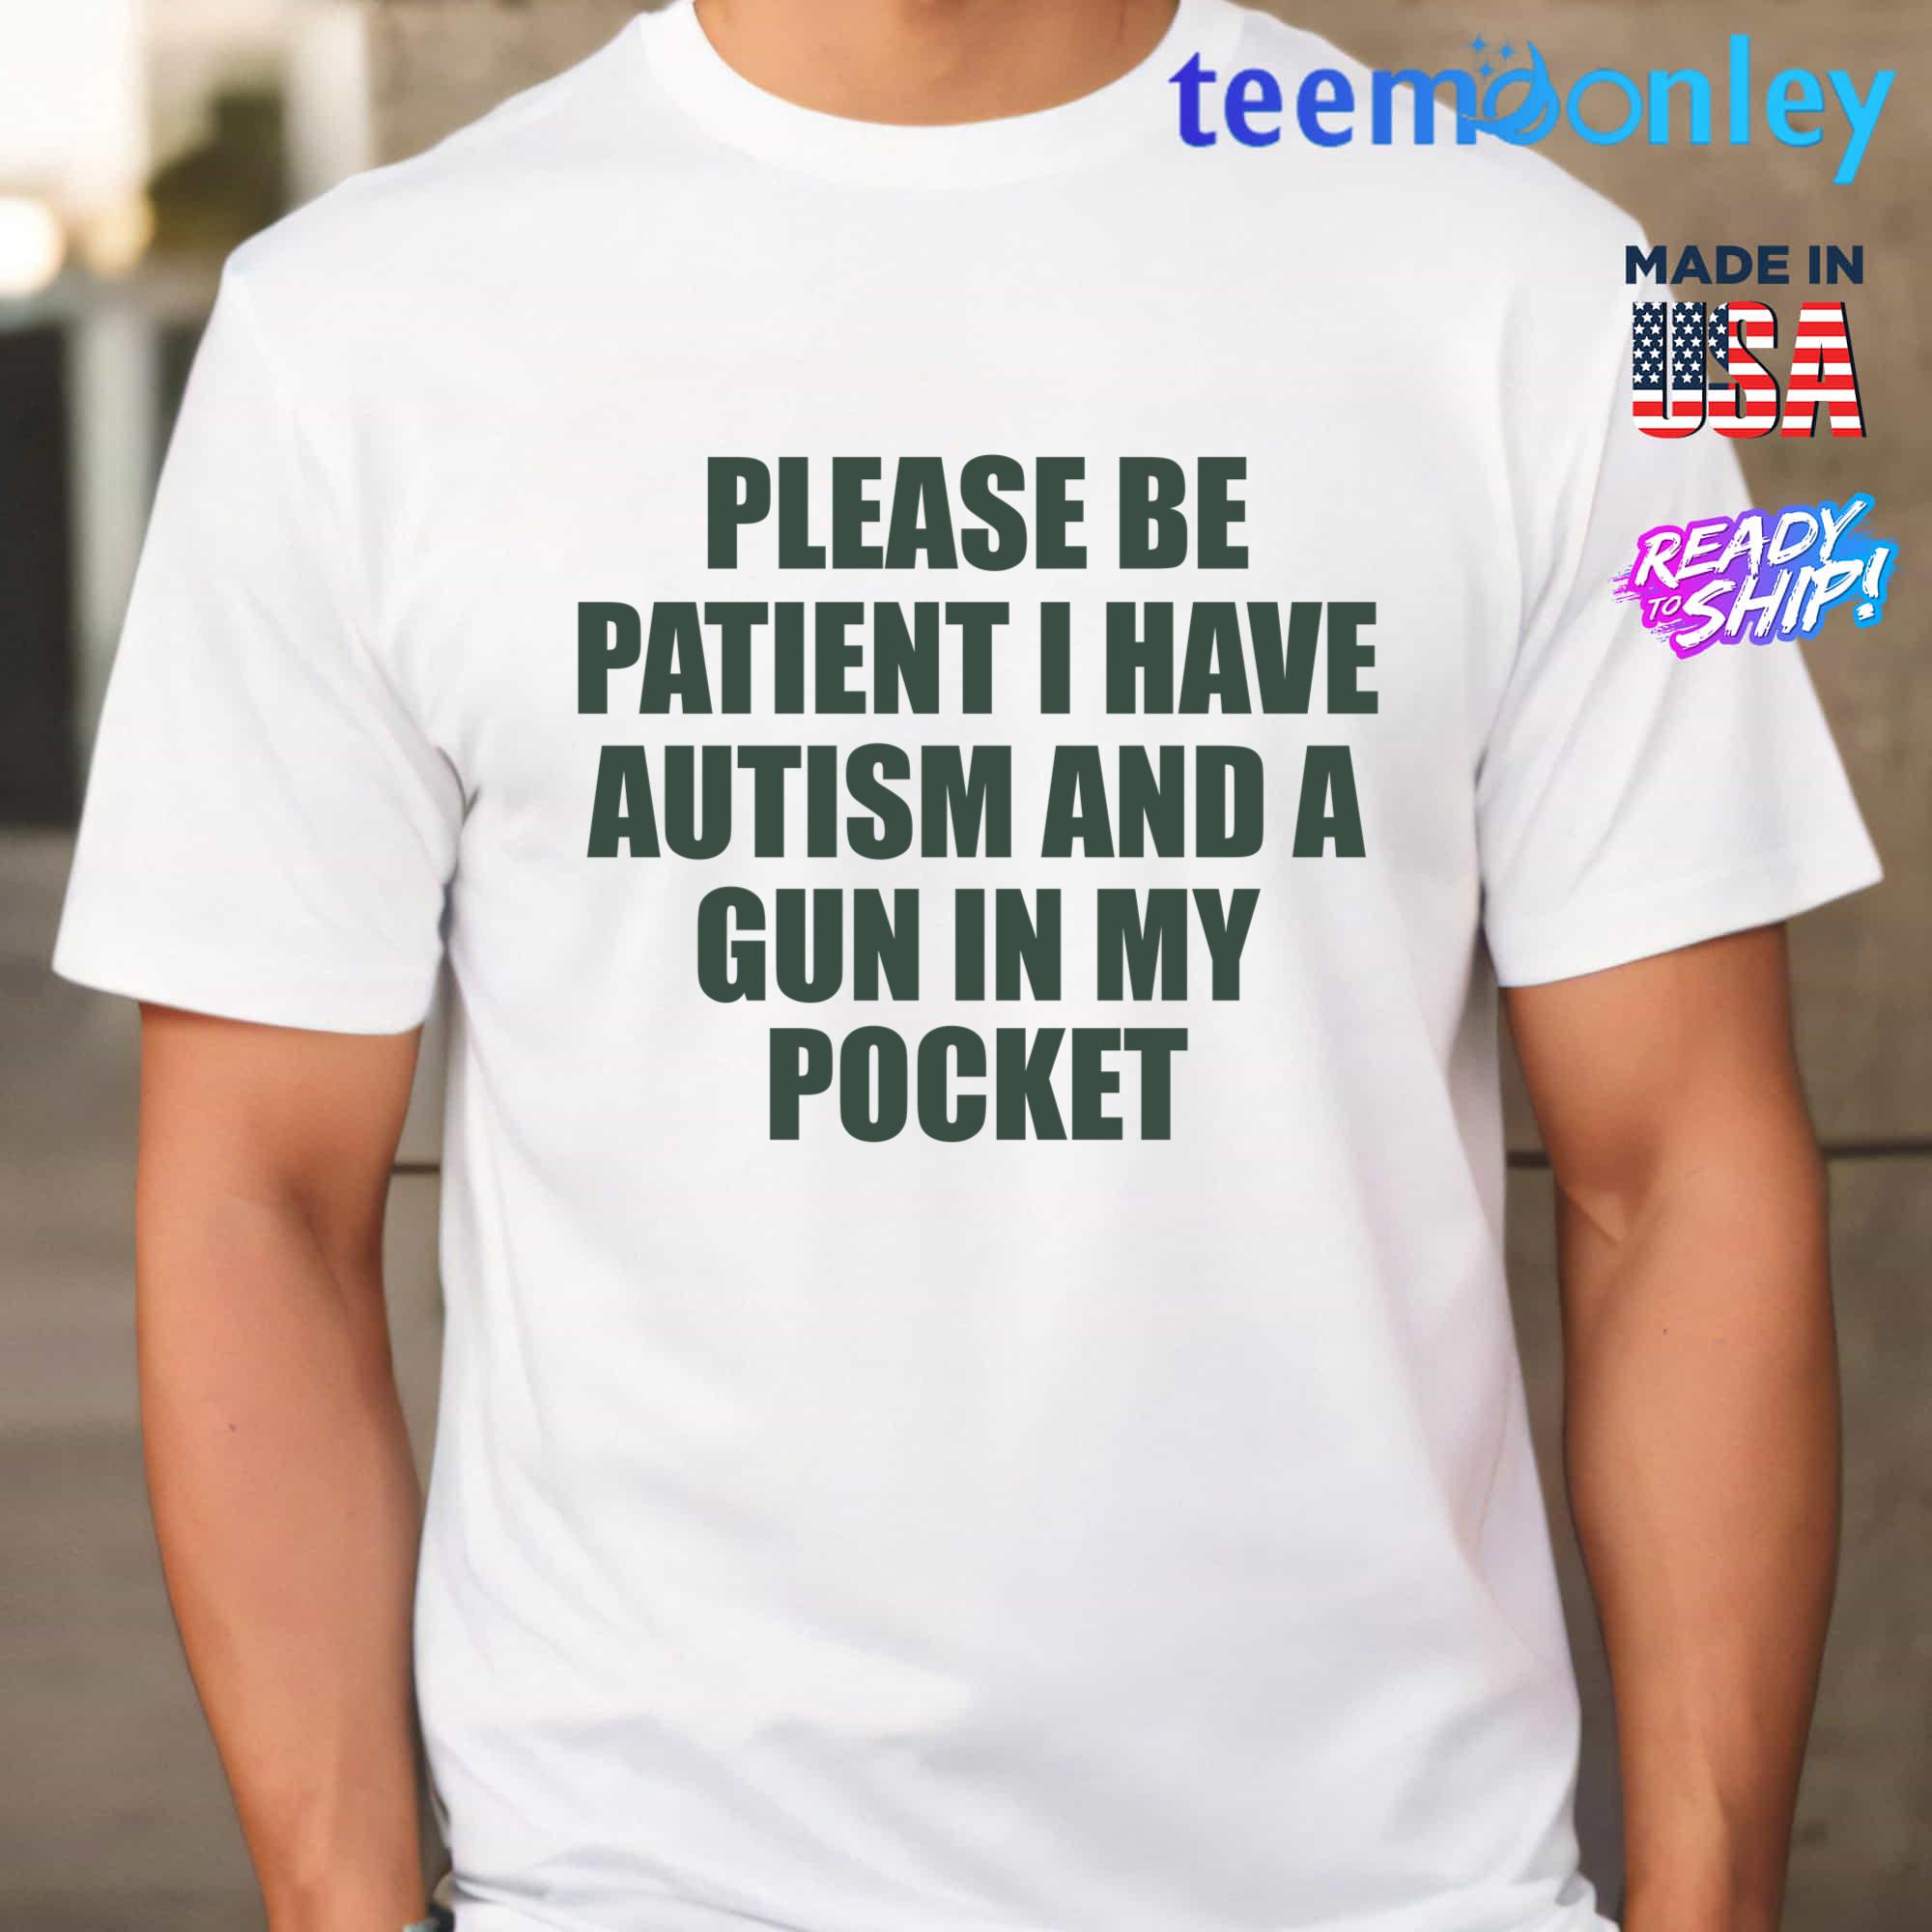 Please-be-patient-i-have-autism-and-a-gun-in-my-pocket-shirt_Men-T-Shirt_White-g500.jpg